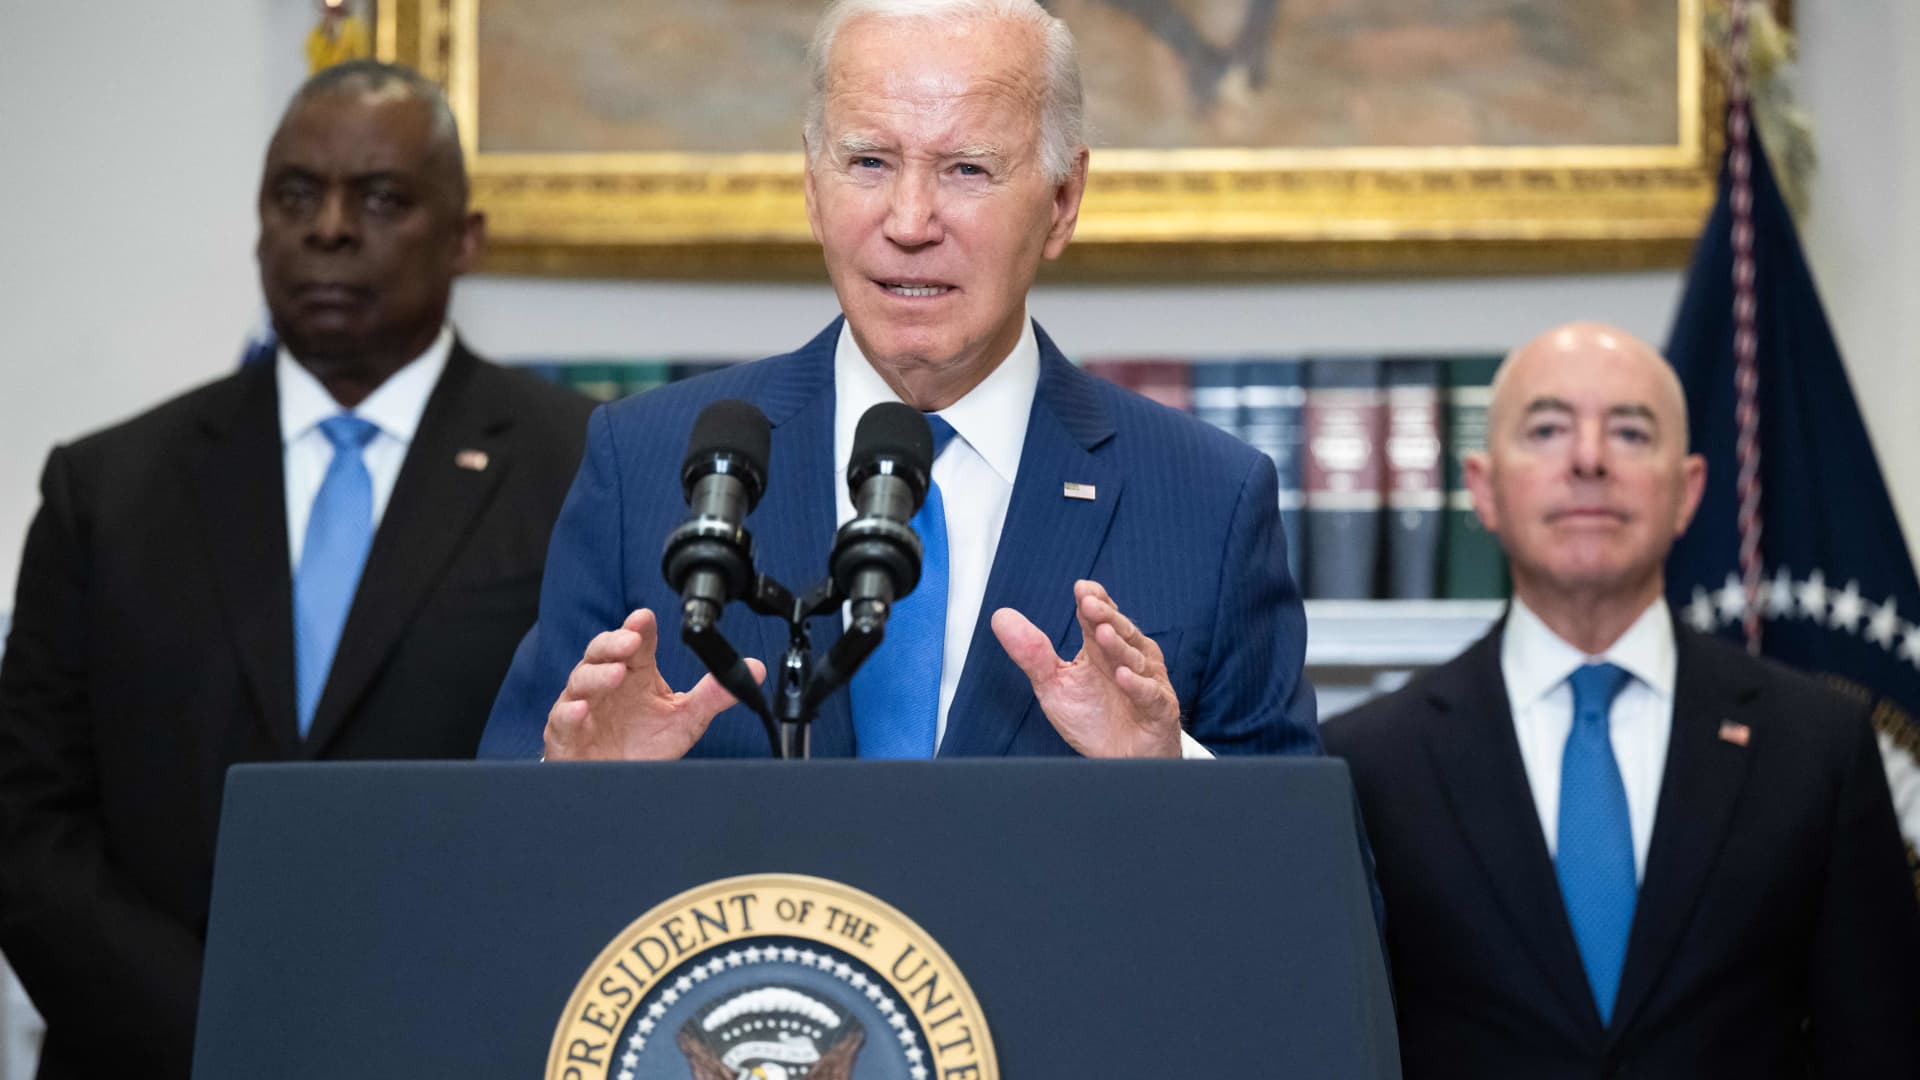 Biden pledges $95 million to shore up Hawaii’s electric grid after deadly wildfires